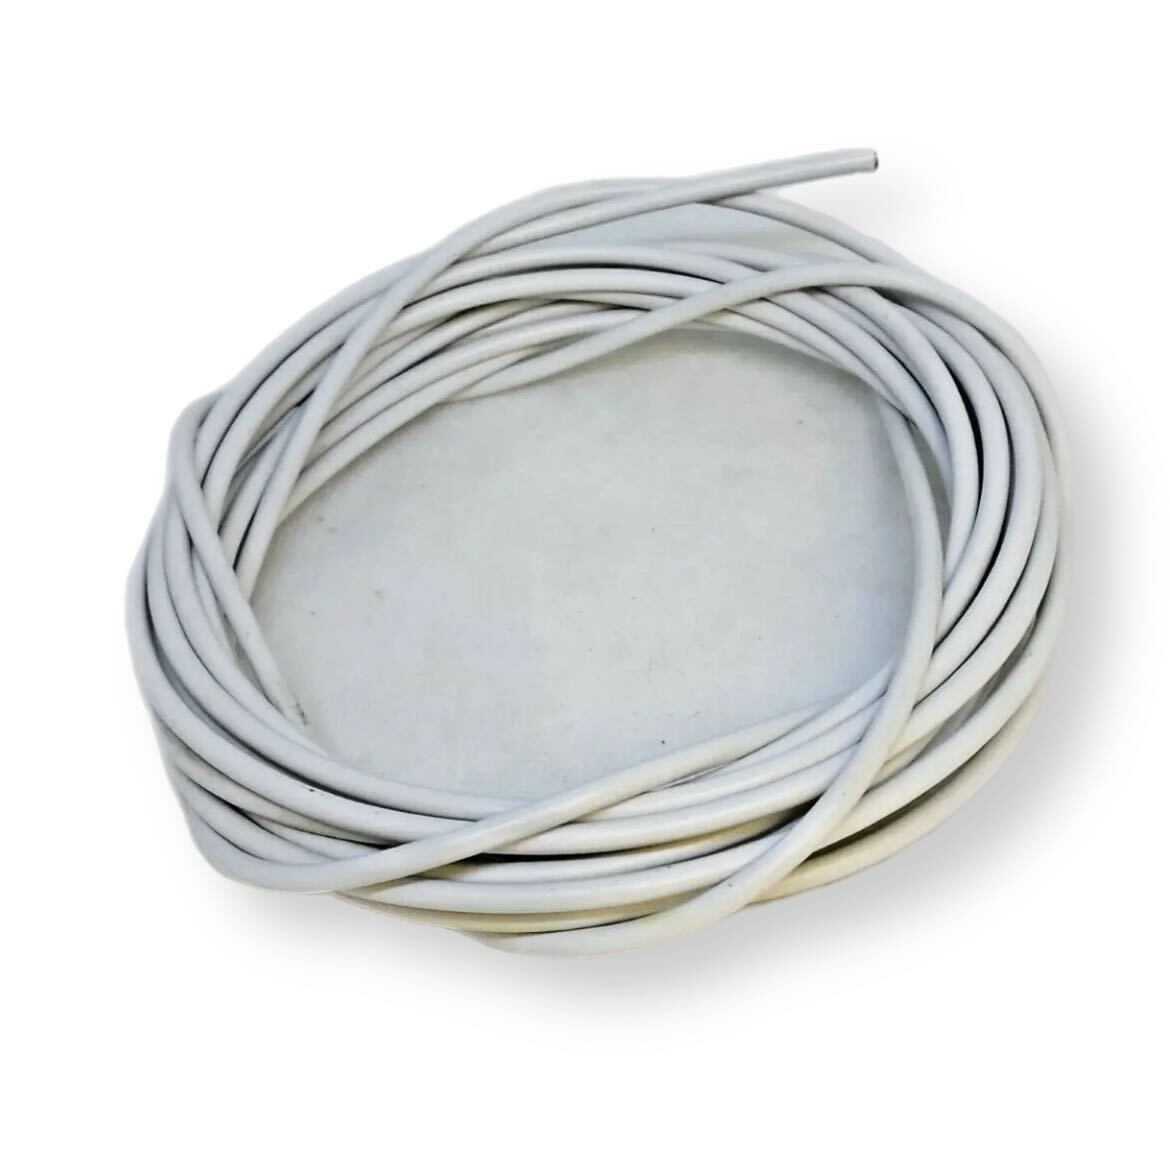 Scooter Motorbike Bike Teflon Lined Cable Outer 5mm White - Sold Per Metre